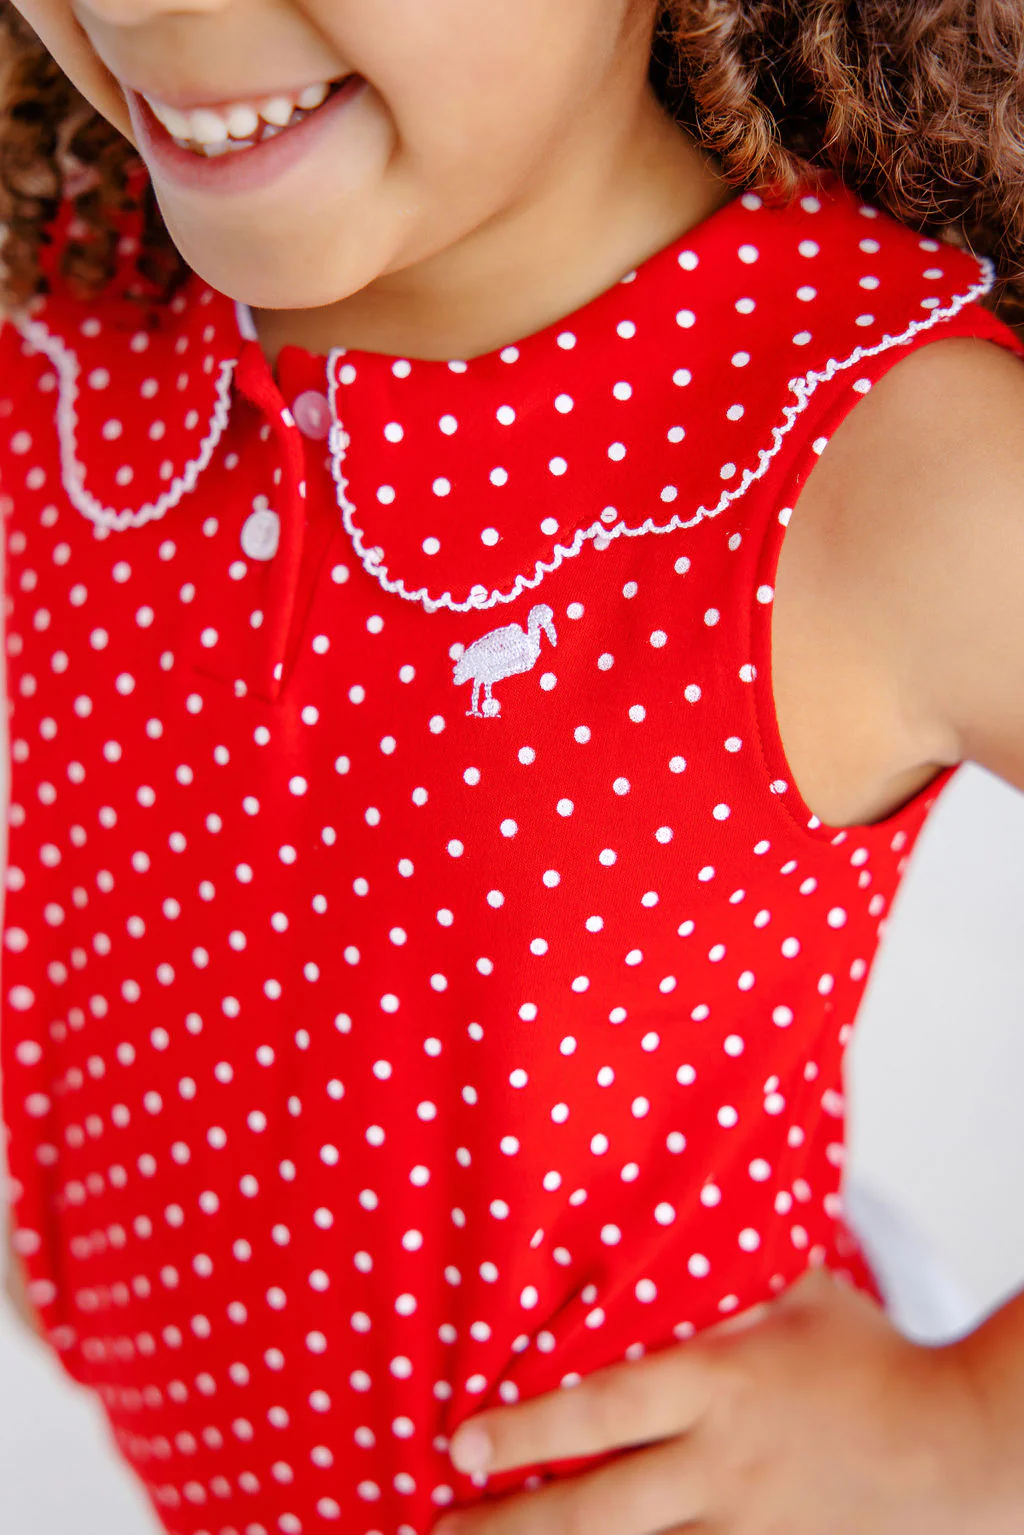 Paige's Playful Polo Richmond Red Worth Avenue White Micro Dot